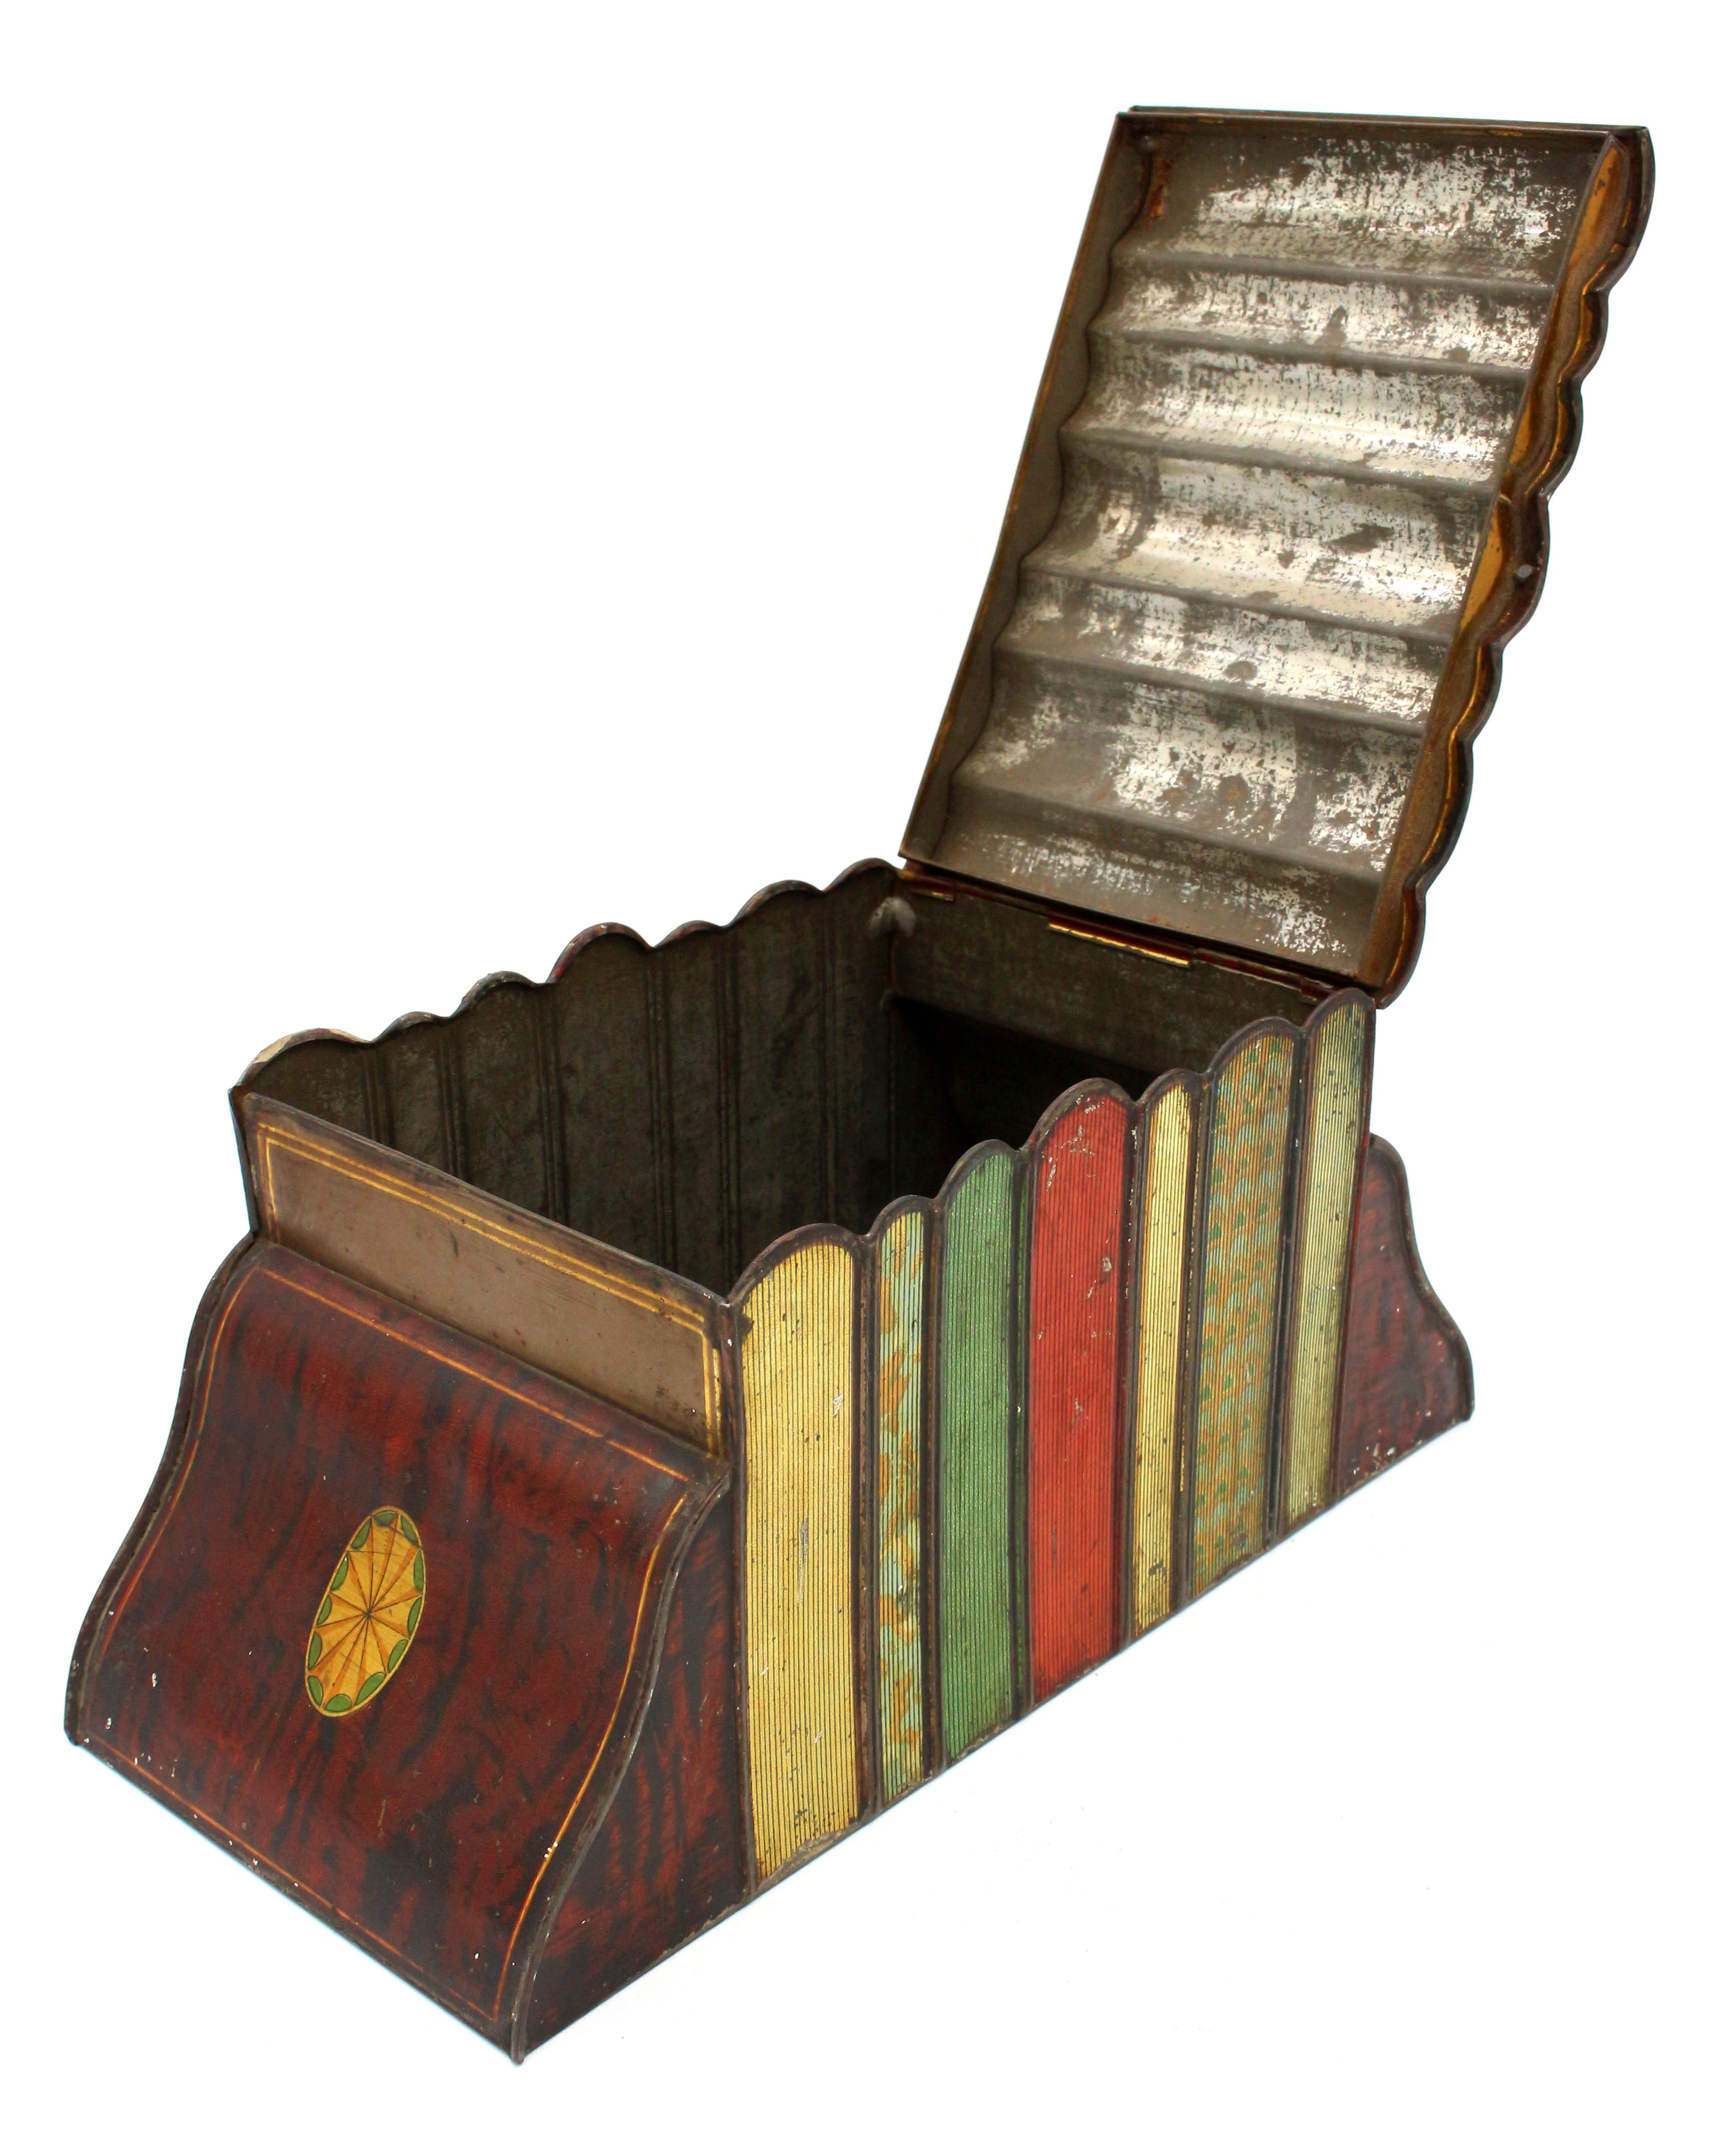 Early 20th Century Books & Bookend Form Biscuit Tin by Huntley & Palmers In Good Condition For Sale In Chapel Hill, NC